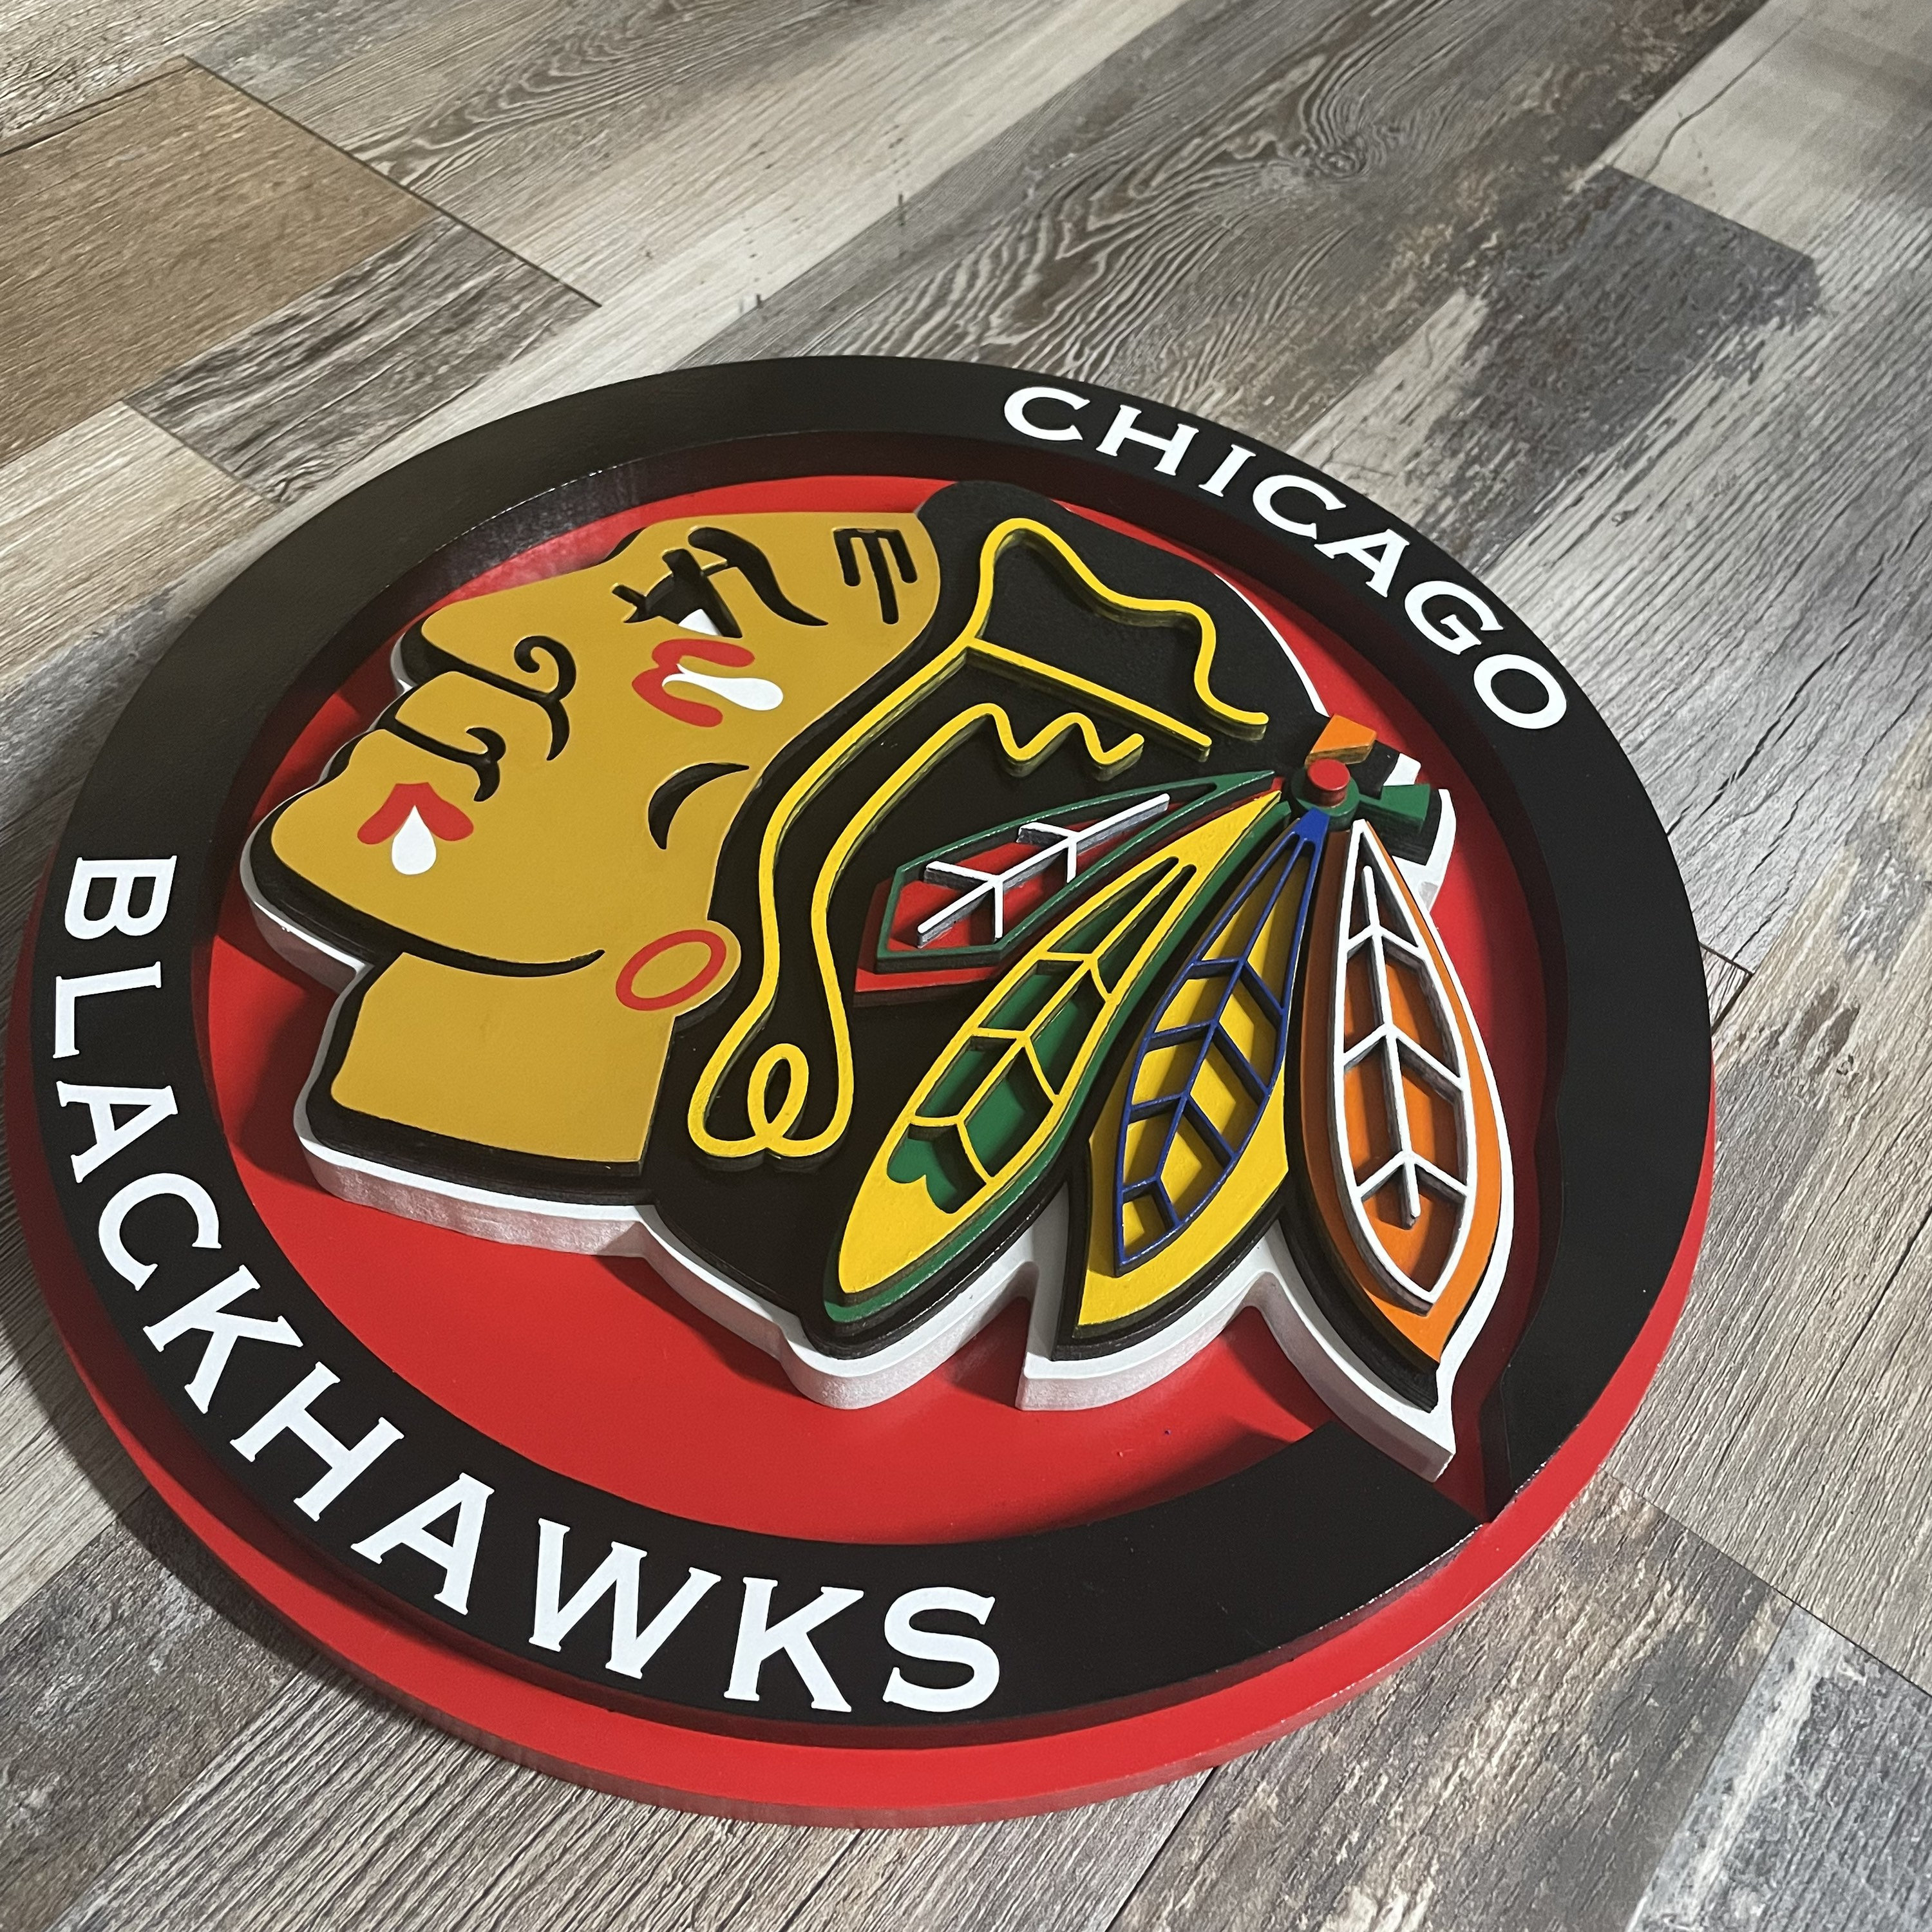 Chicago Blackhawks Gift Guide: 10 must-have gifts for the Man Cave